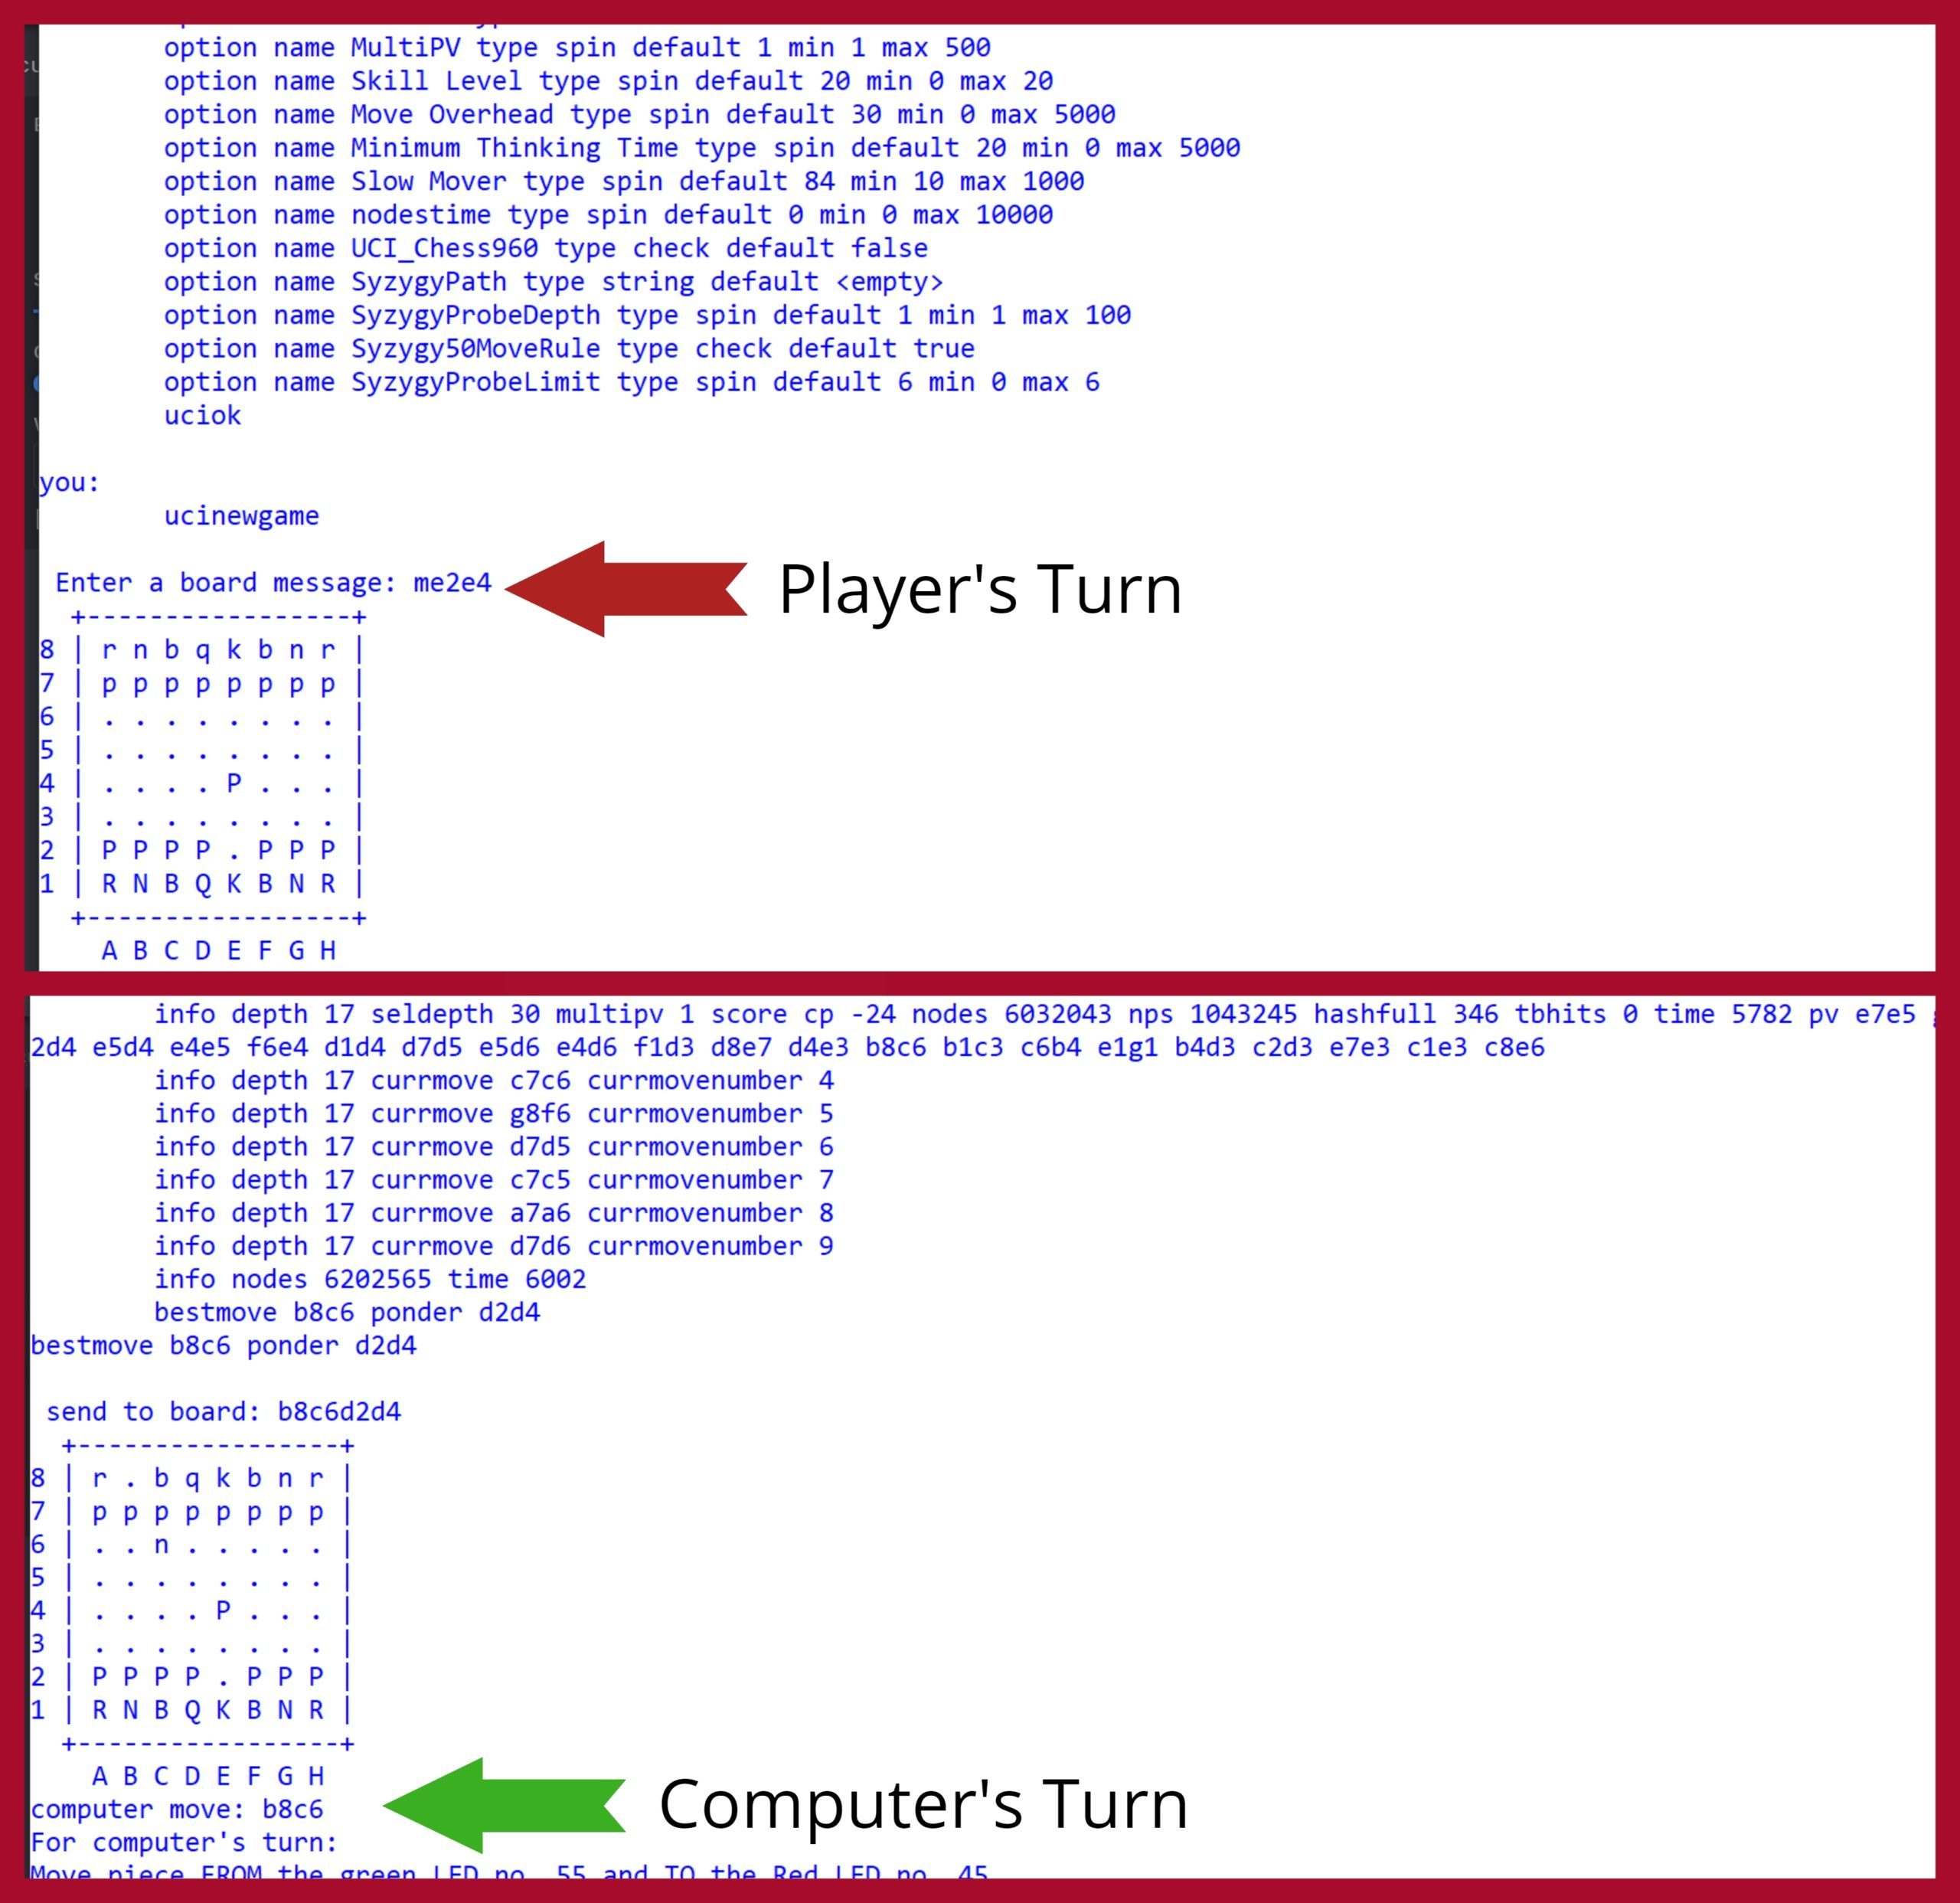 This image shows console interfacing with the Stockfish chess engine